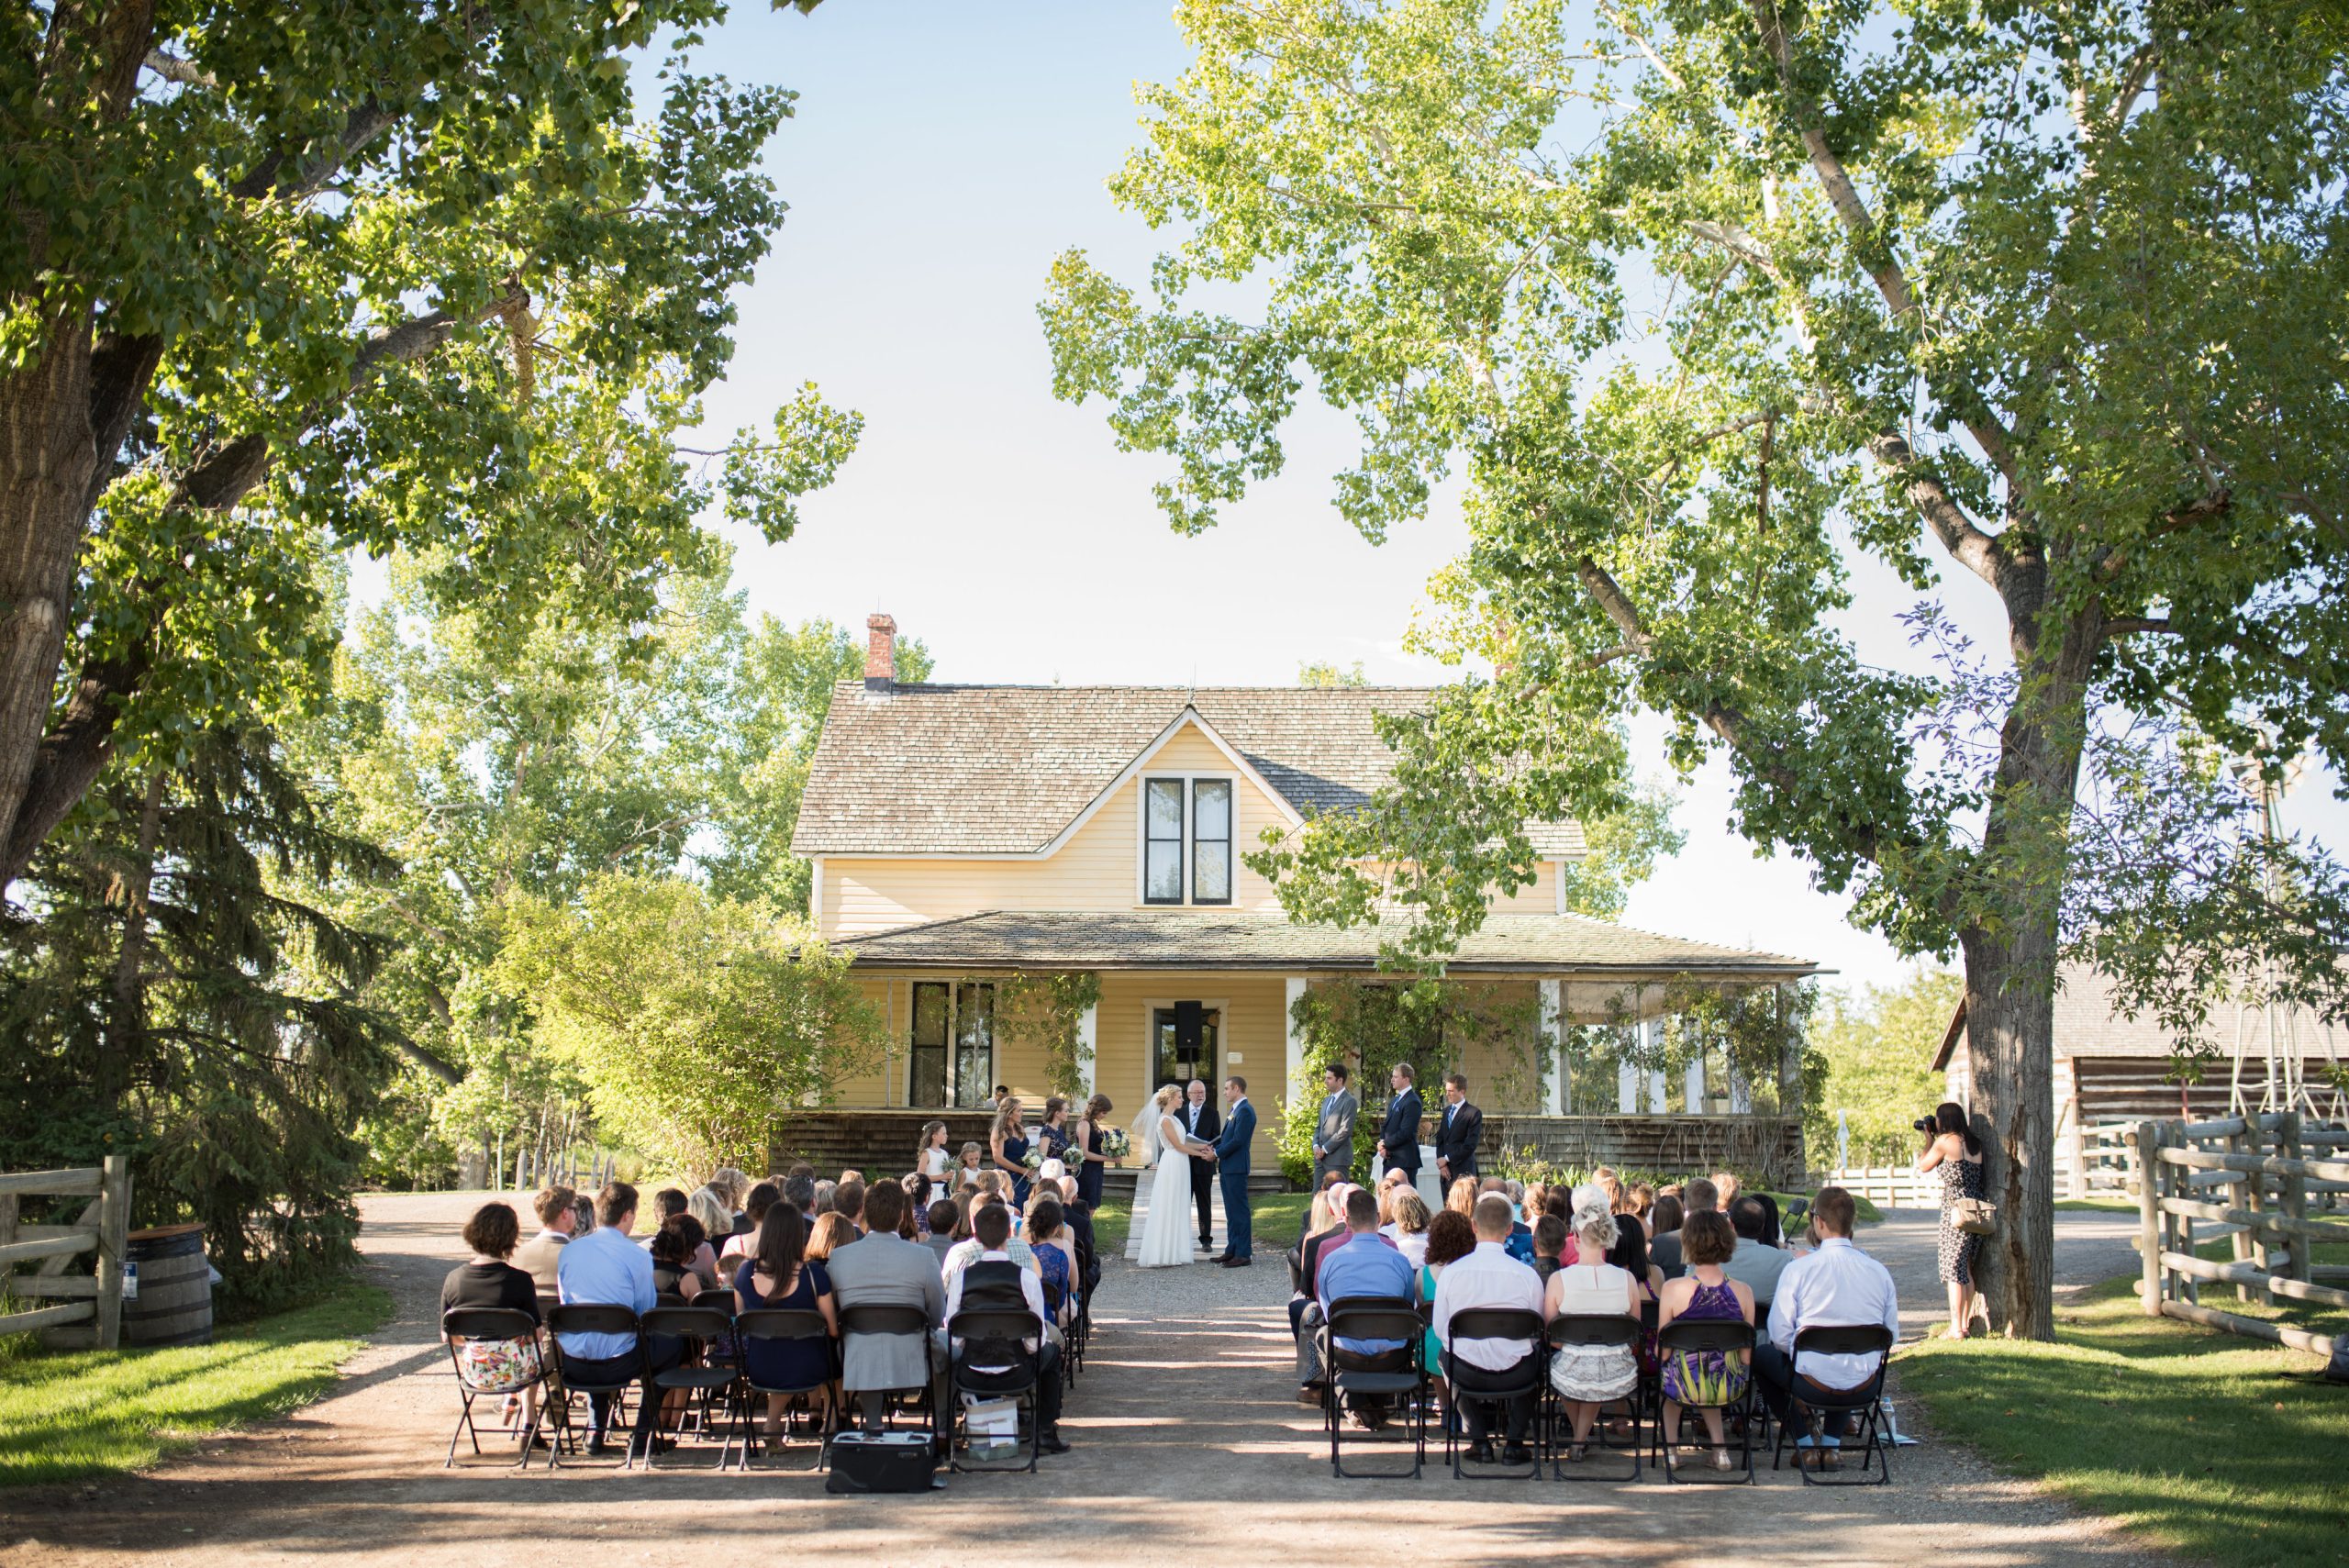 A wedding happening outside of a yellow ranch house